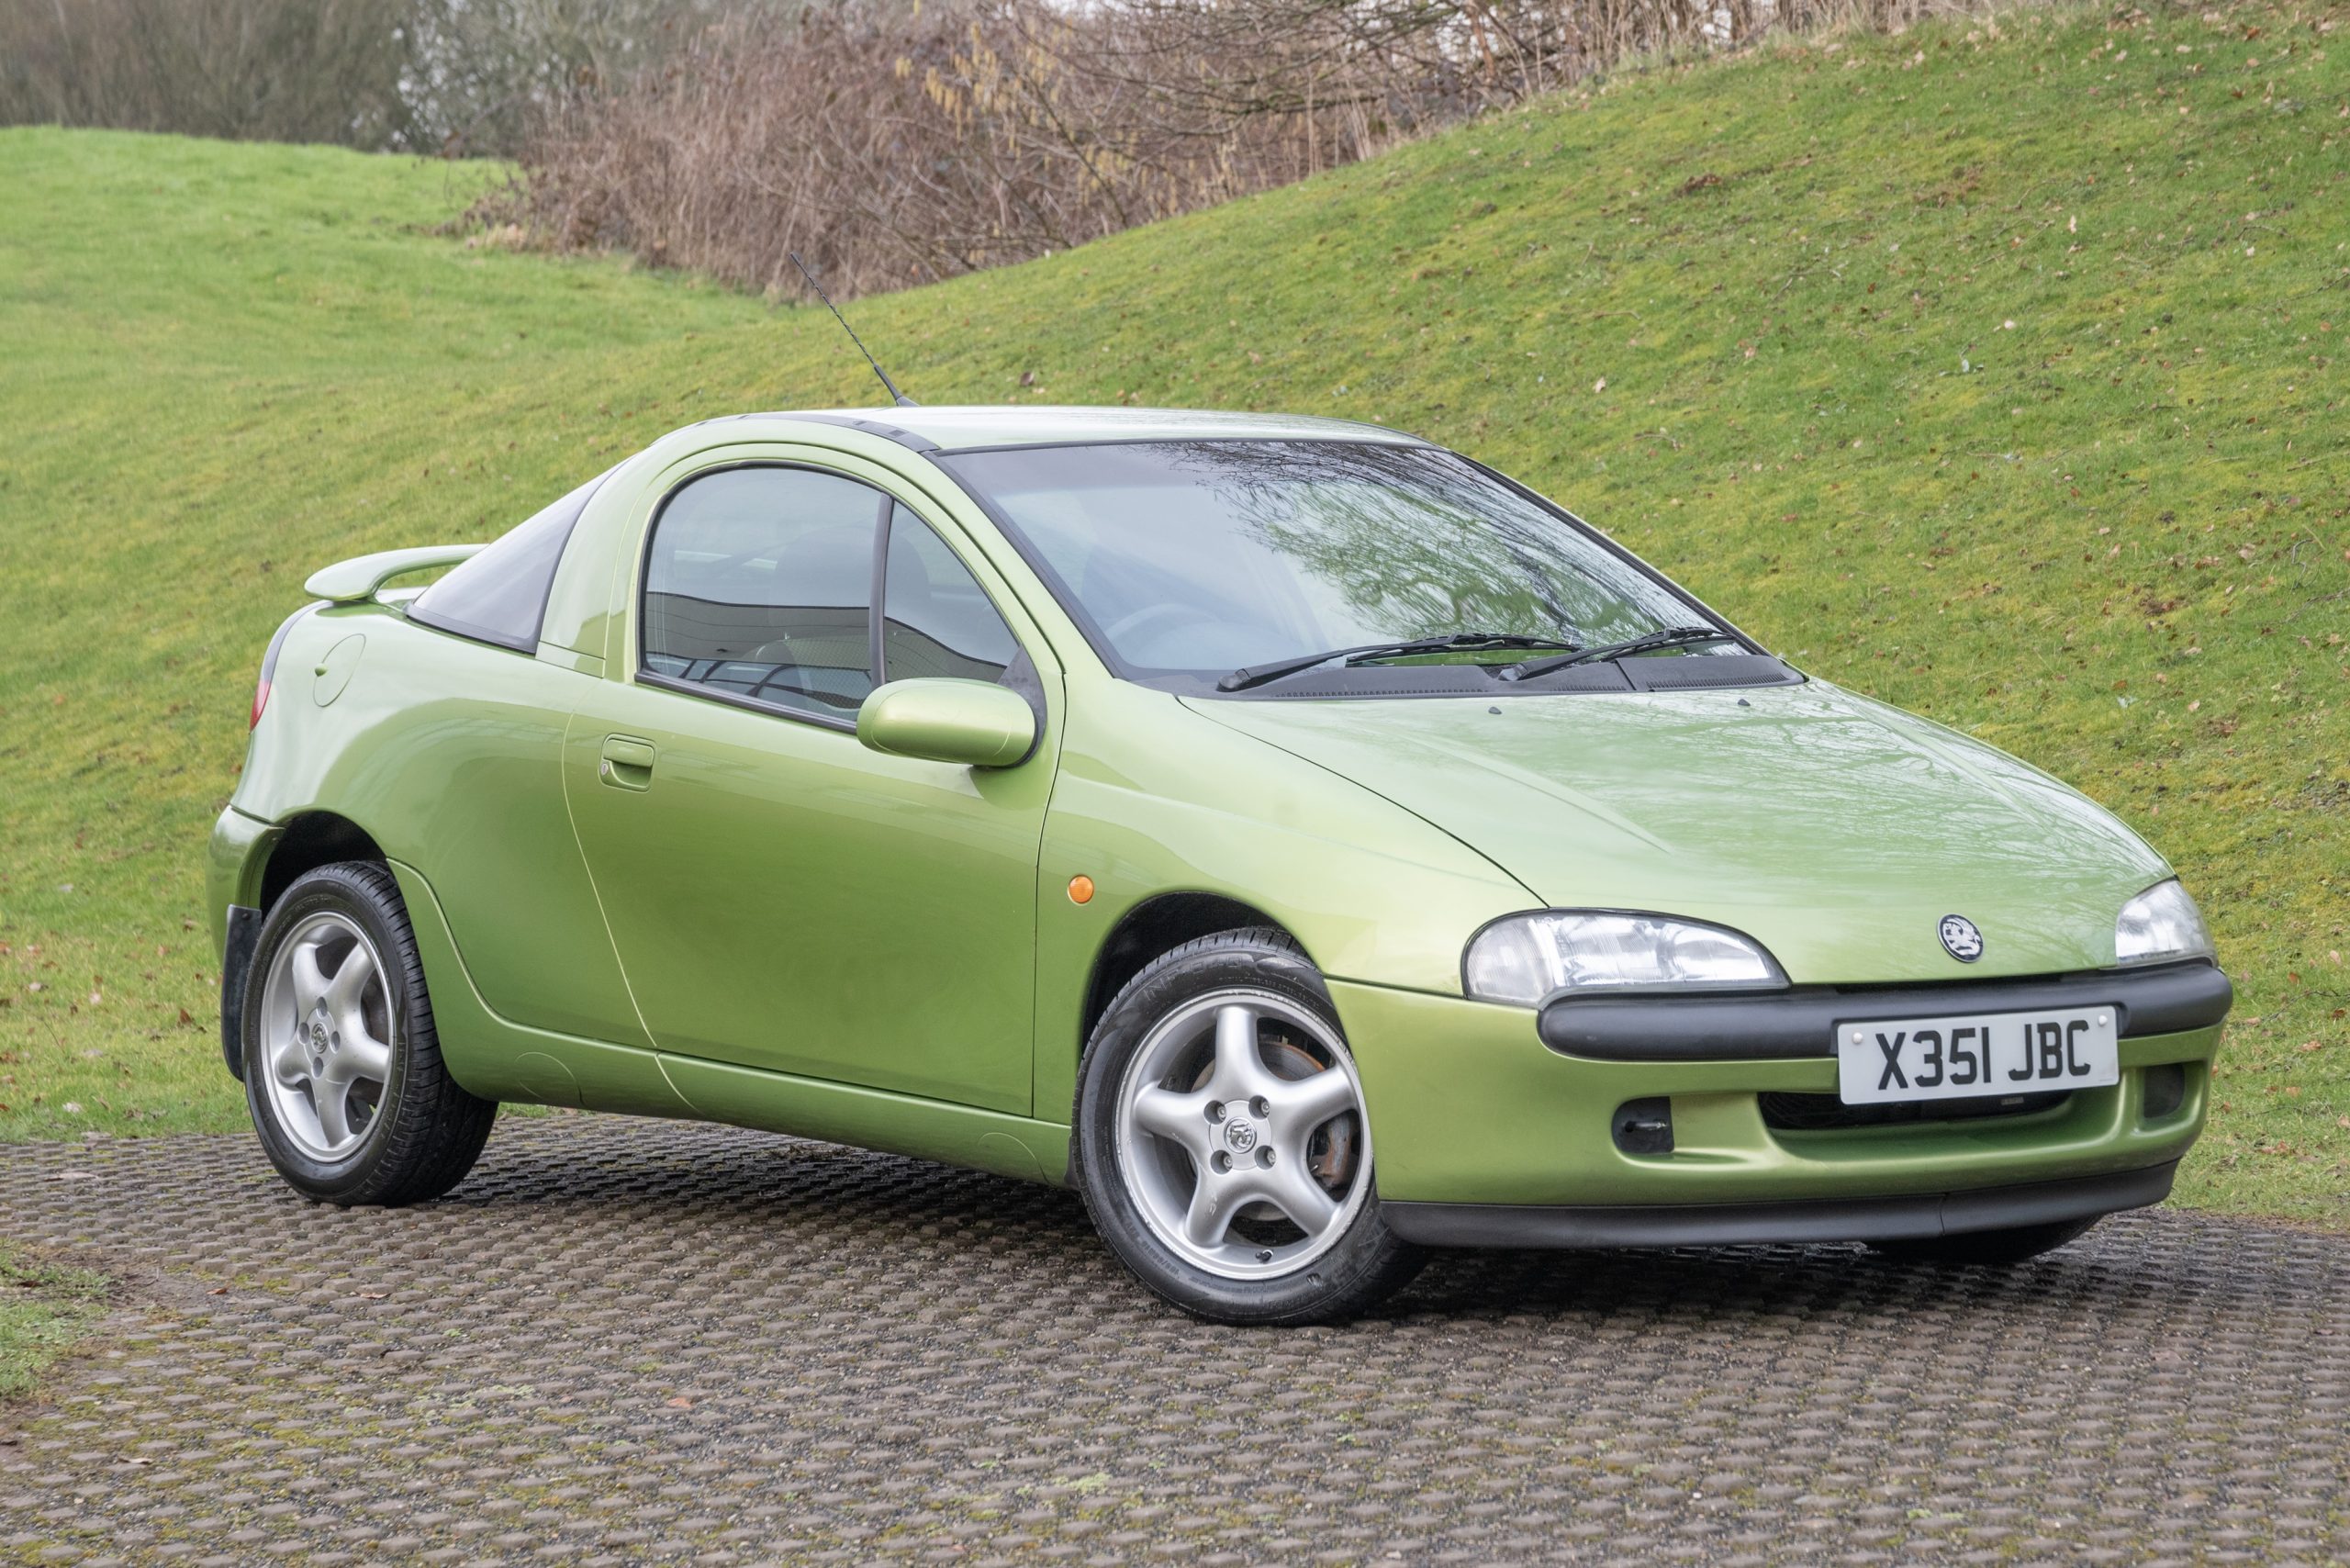 Fancy getting your claws on this Vauxhall Tigra?